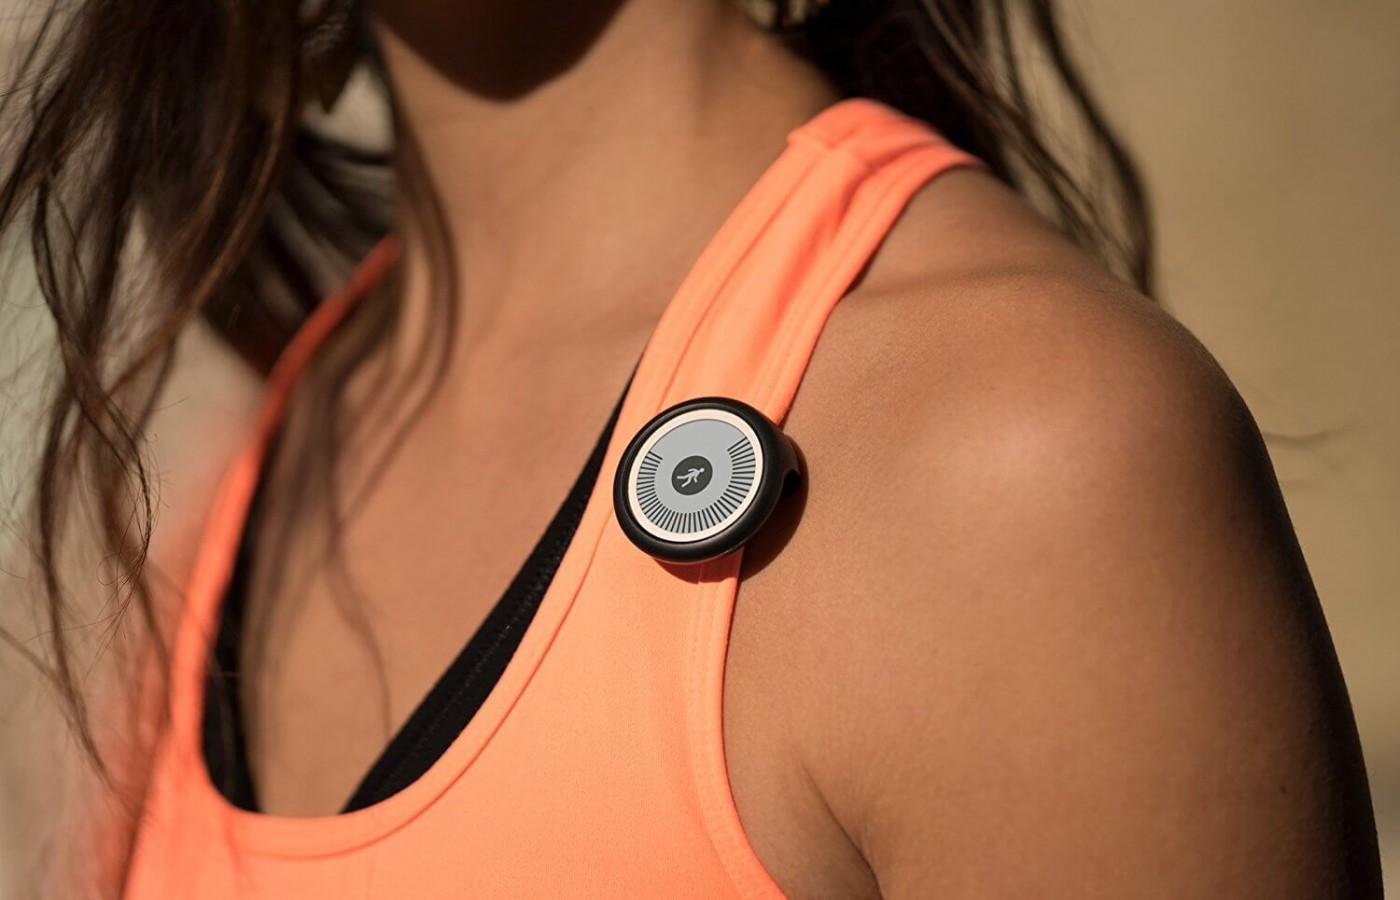 Nokia Go can be worn as a watch or worn clipped onto clothes